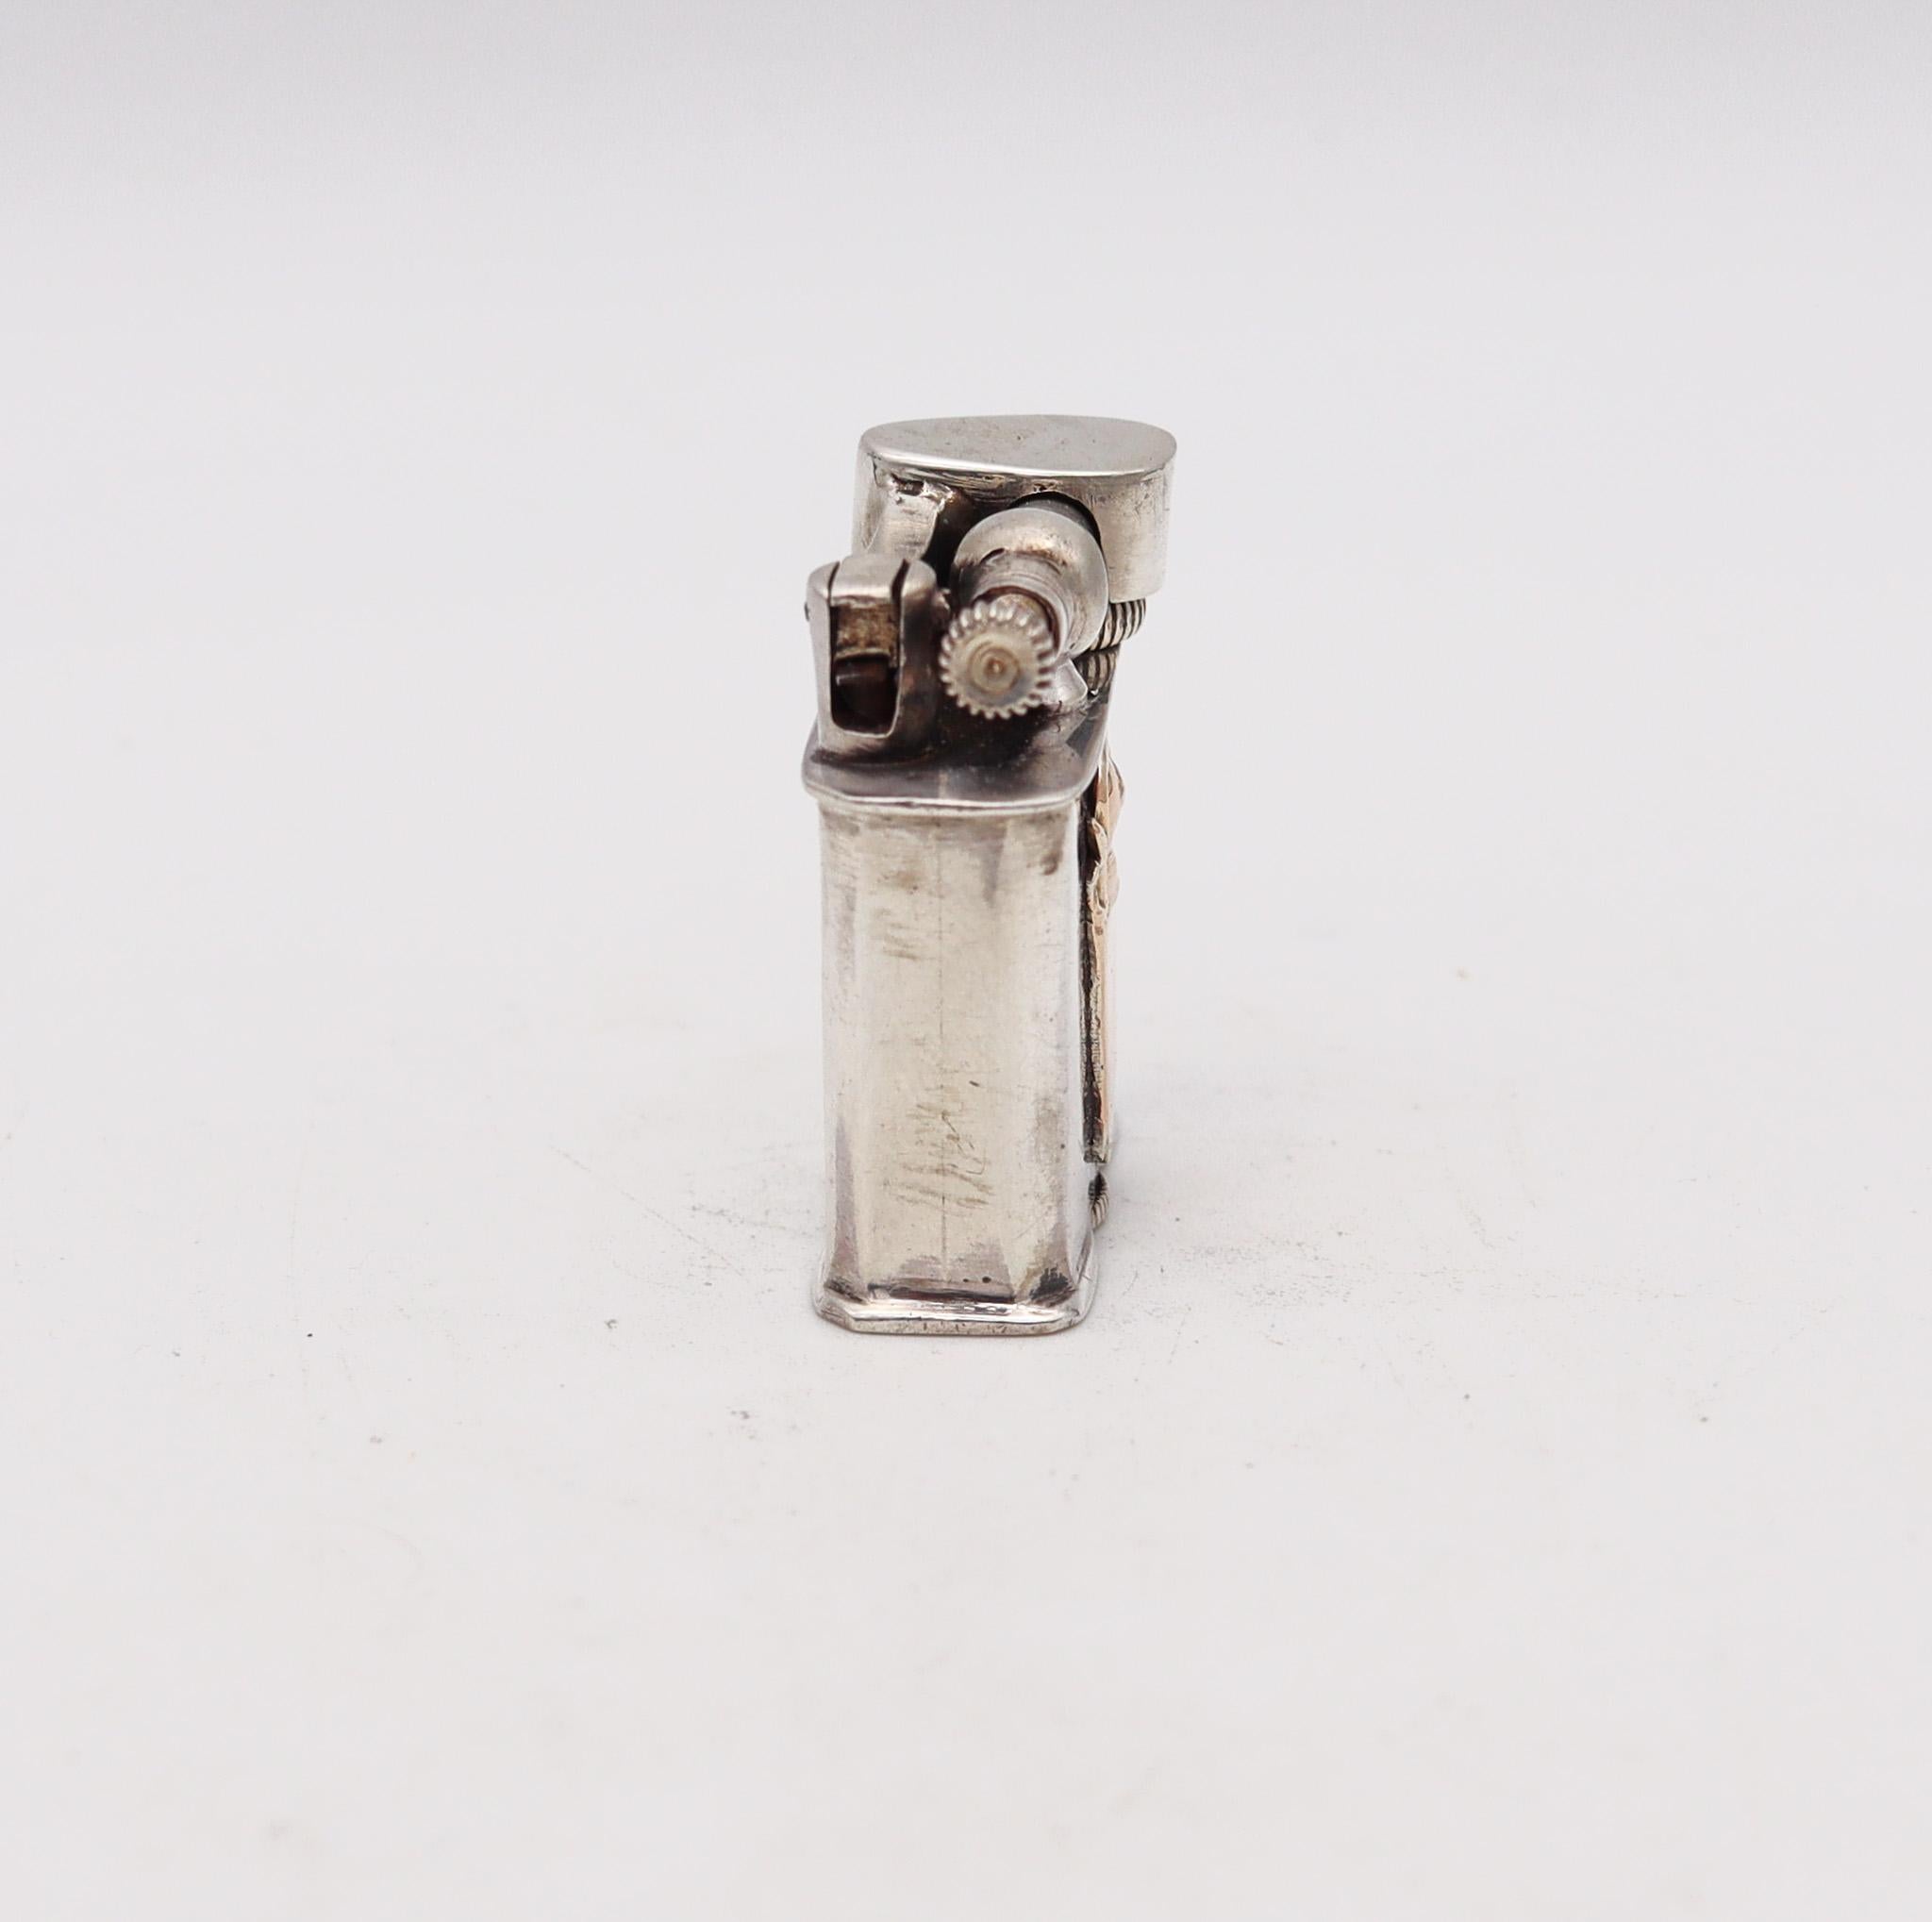 Lift arm petrol lighter made in Mexico

Beautiful vintage lift arm petrol lighter, created in the city of Taxco in Mexico during the late Art Deco period, circa 1940. It was masterfully crafted in solid .925/.999 sterling silver with high polished